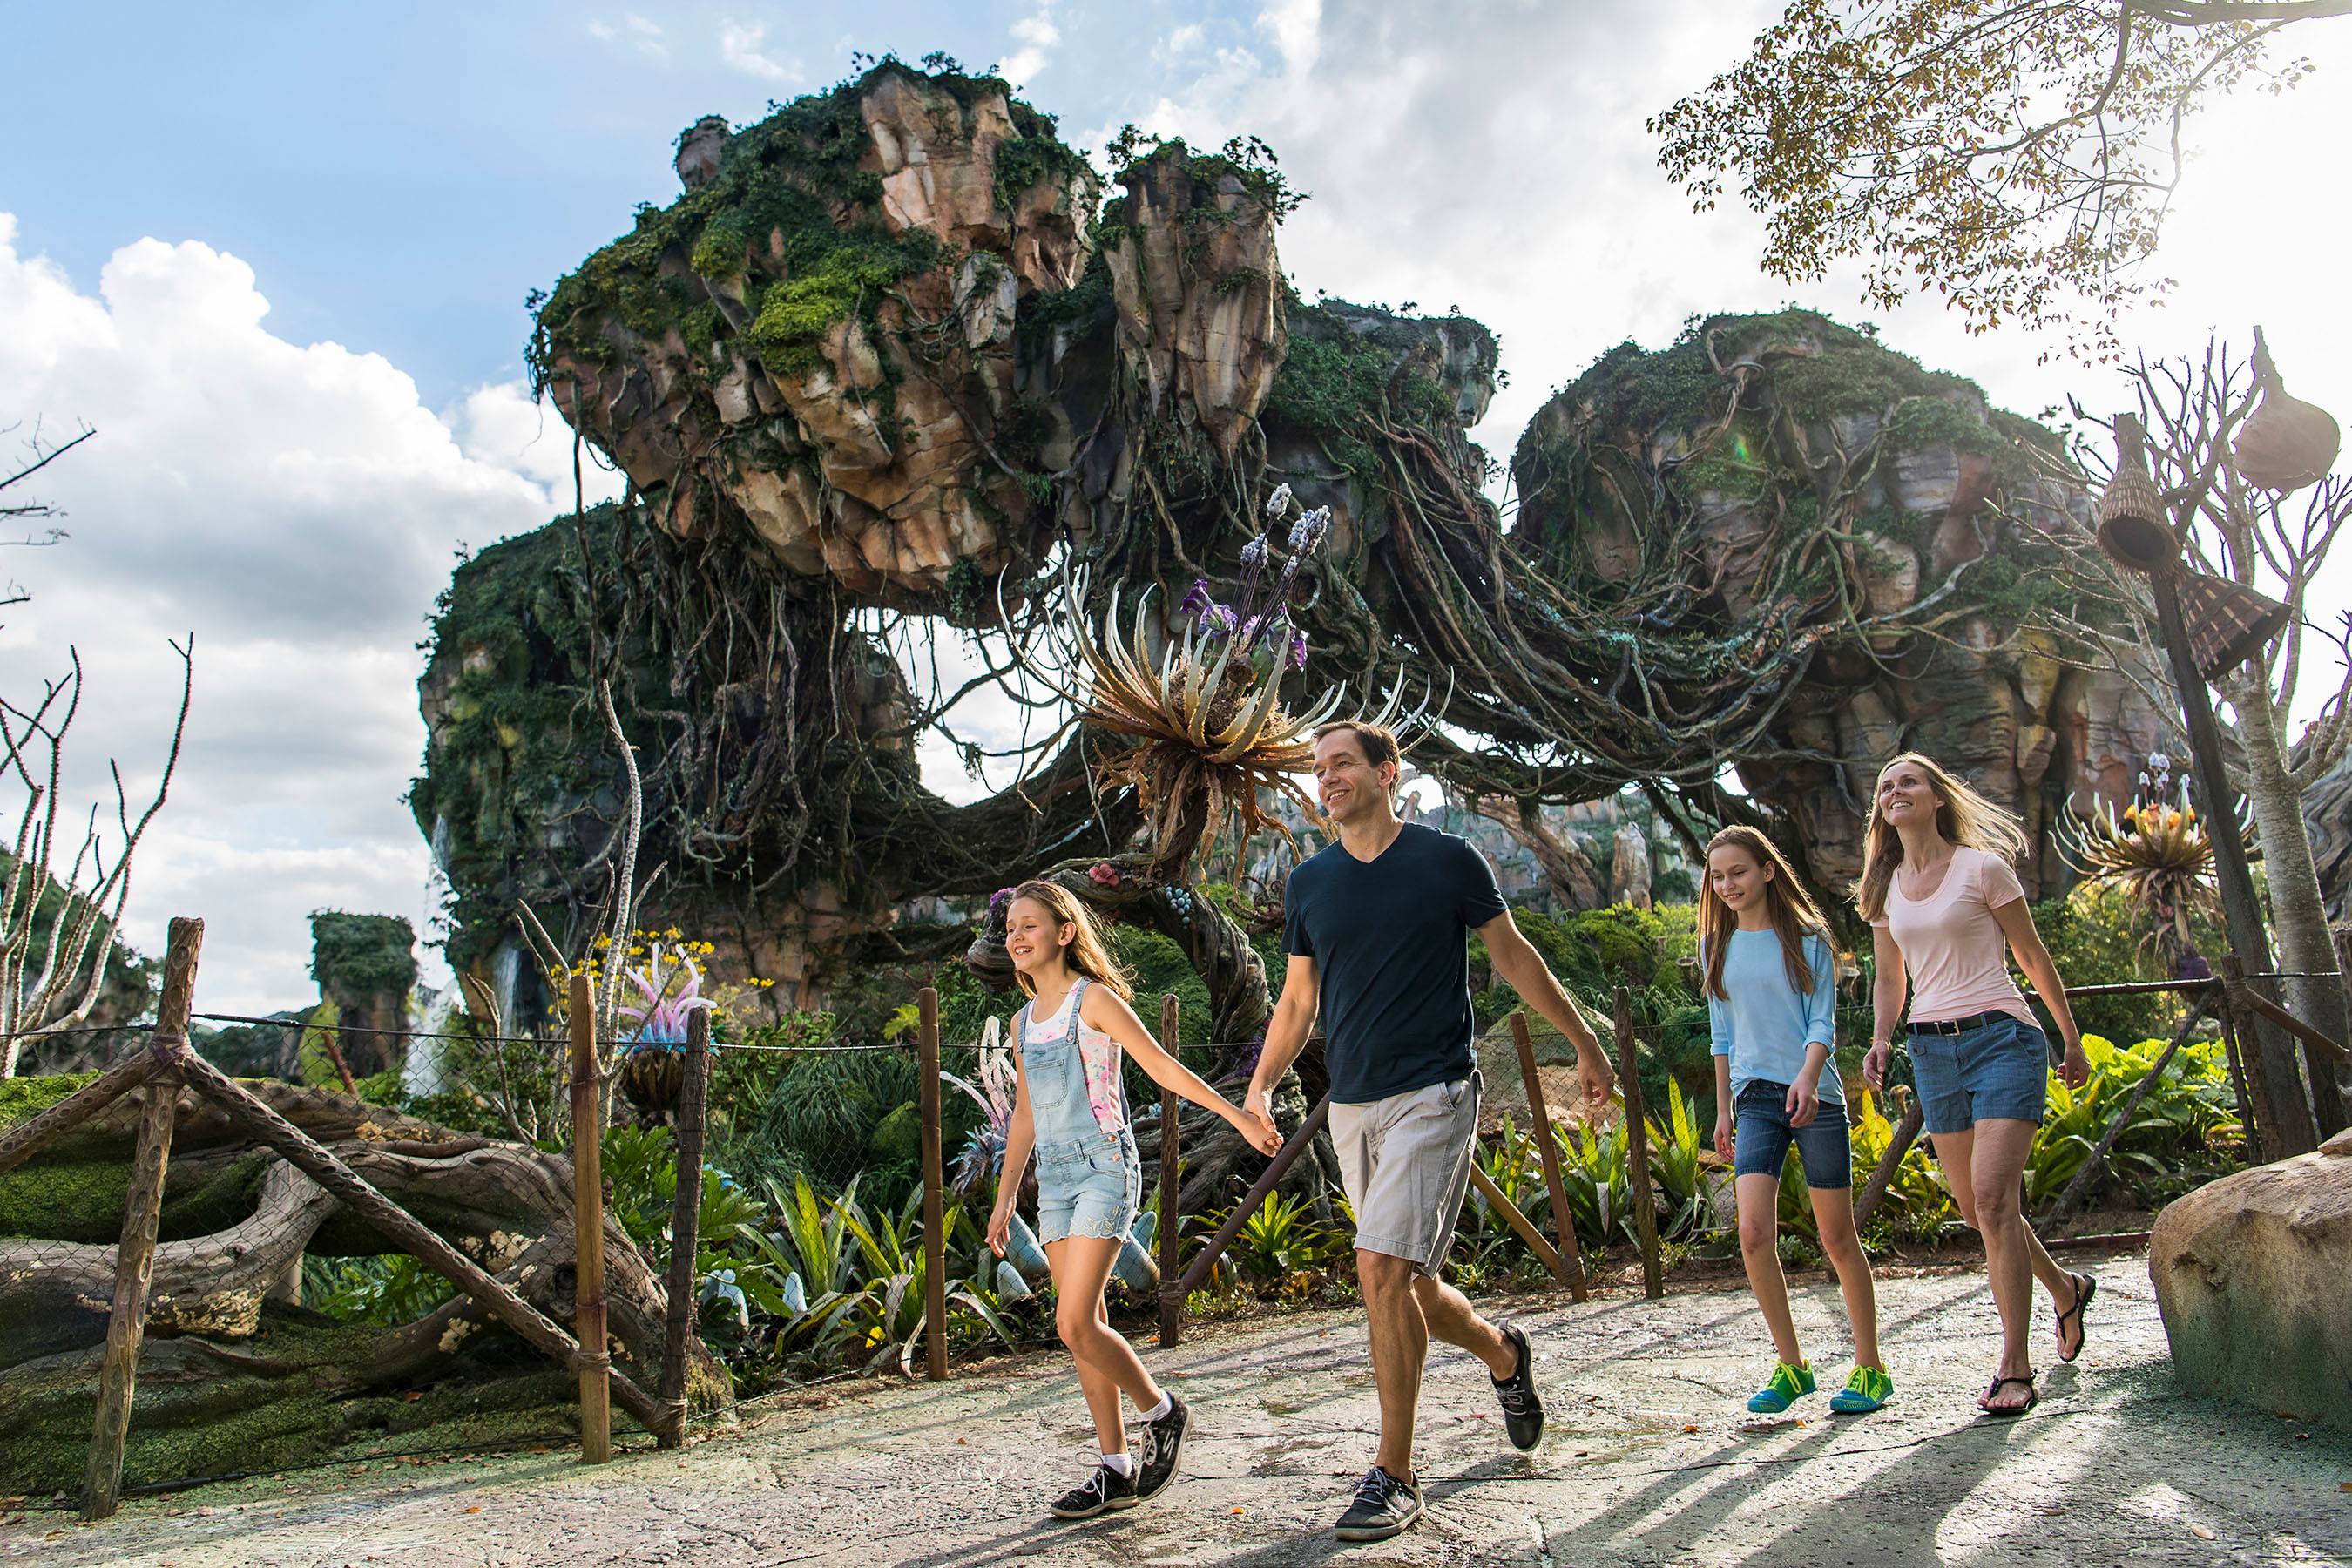 Pandora - The World of Avatar to open May 27